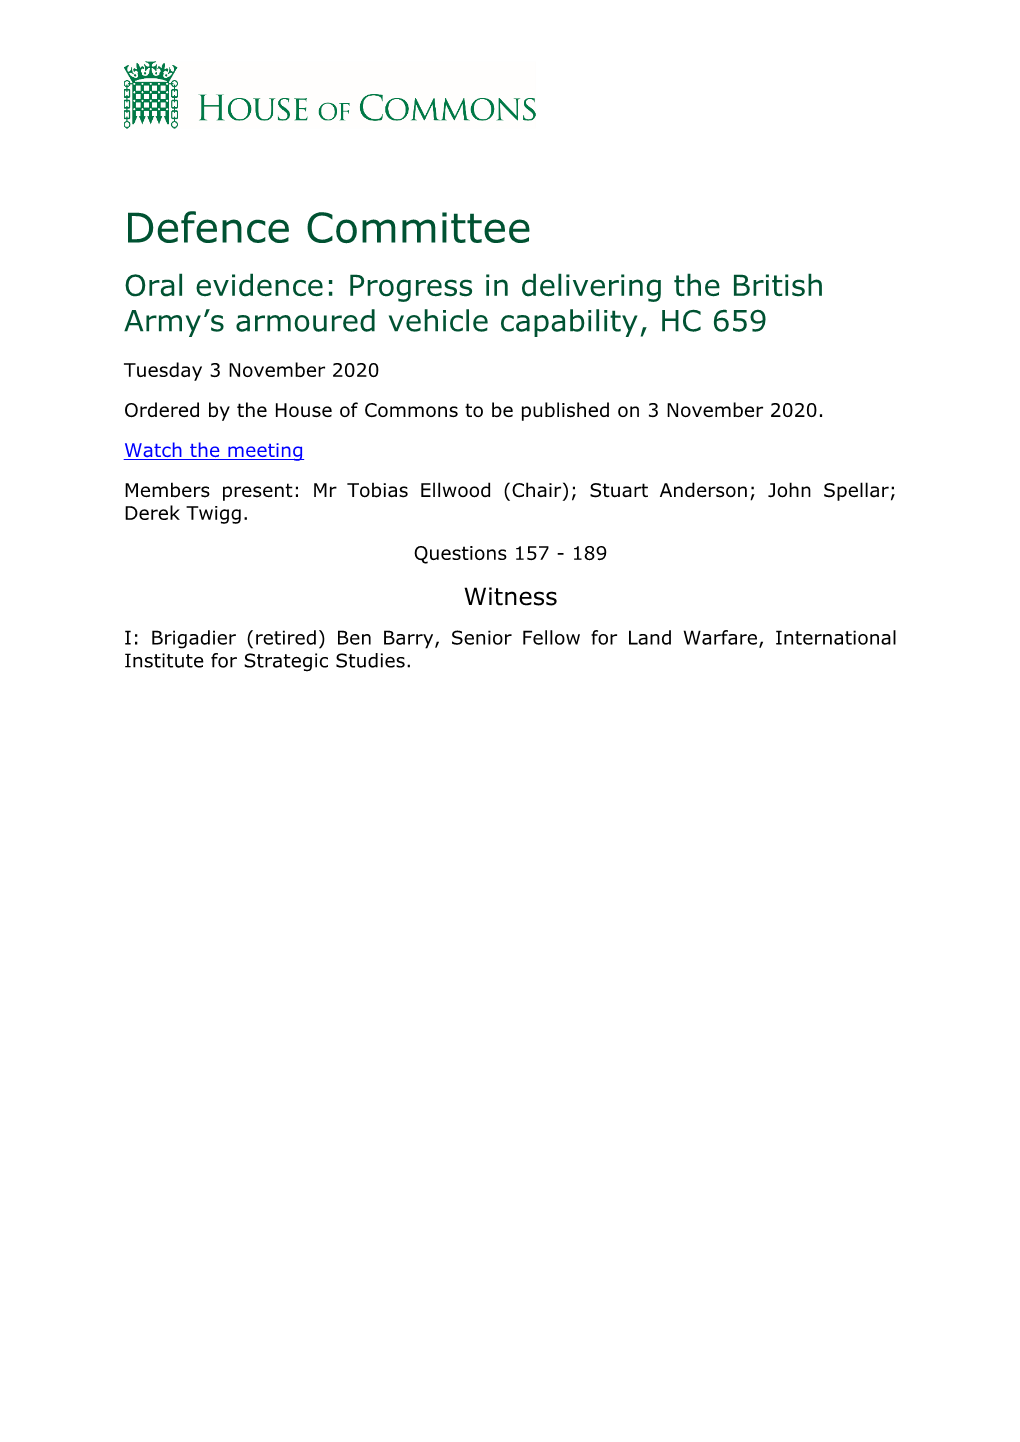 Defence Committee Oral Evidence: Progress in Delivering the British Army’S Armoured Vehicle Capability, HC 659